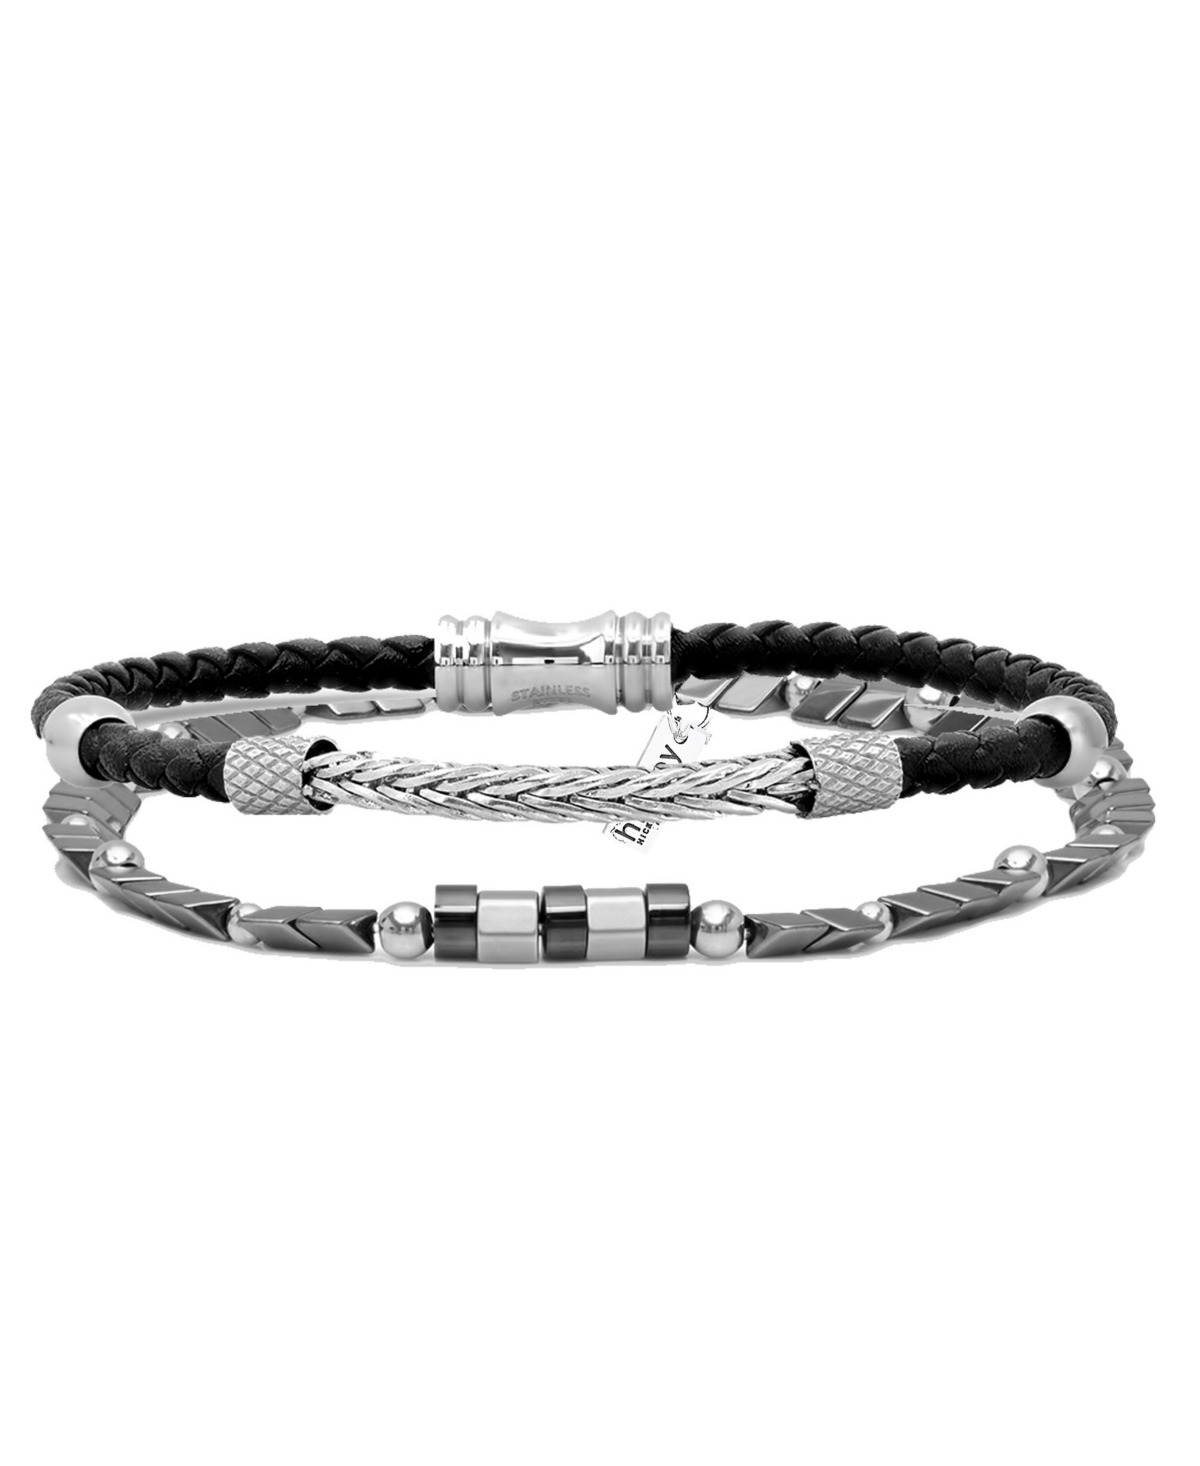 Hmy Jewelry Hickey By Hickey Freeman Thin Genuine Leather With Braided Metal Accent Id Hematite Bracelet, 2 Piec In Multi